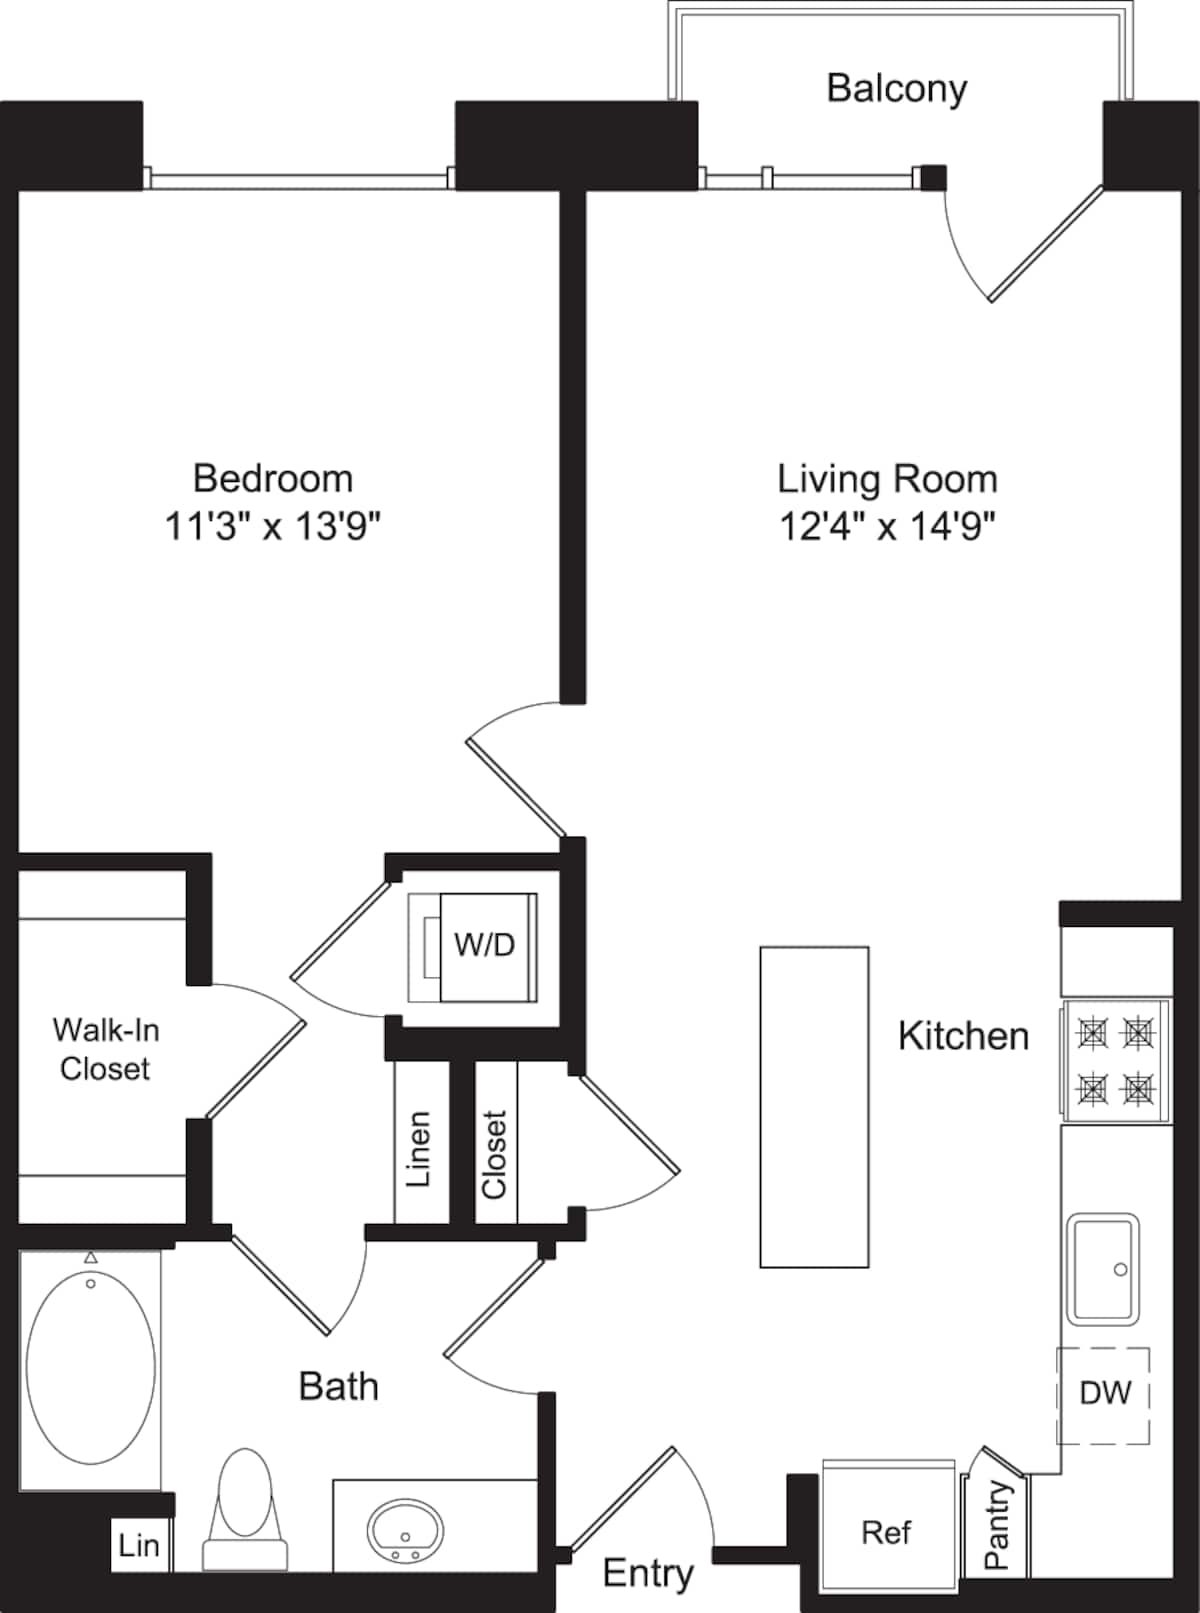 Floorplan diagram for One Bed A1 with Balcony, showing 1 bedroom